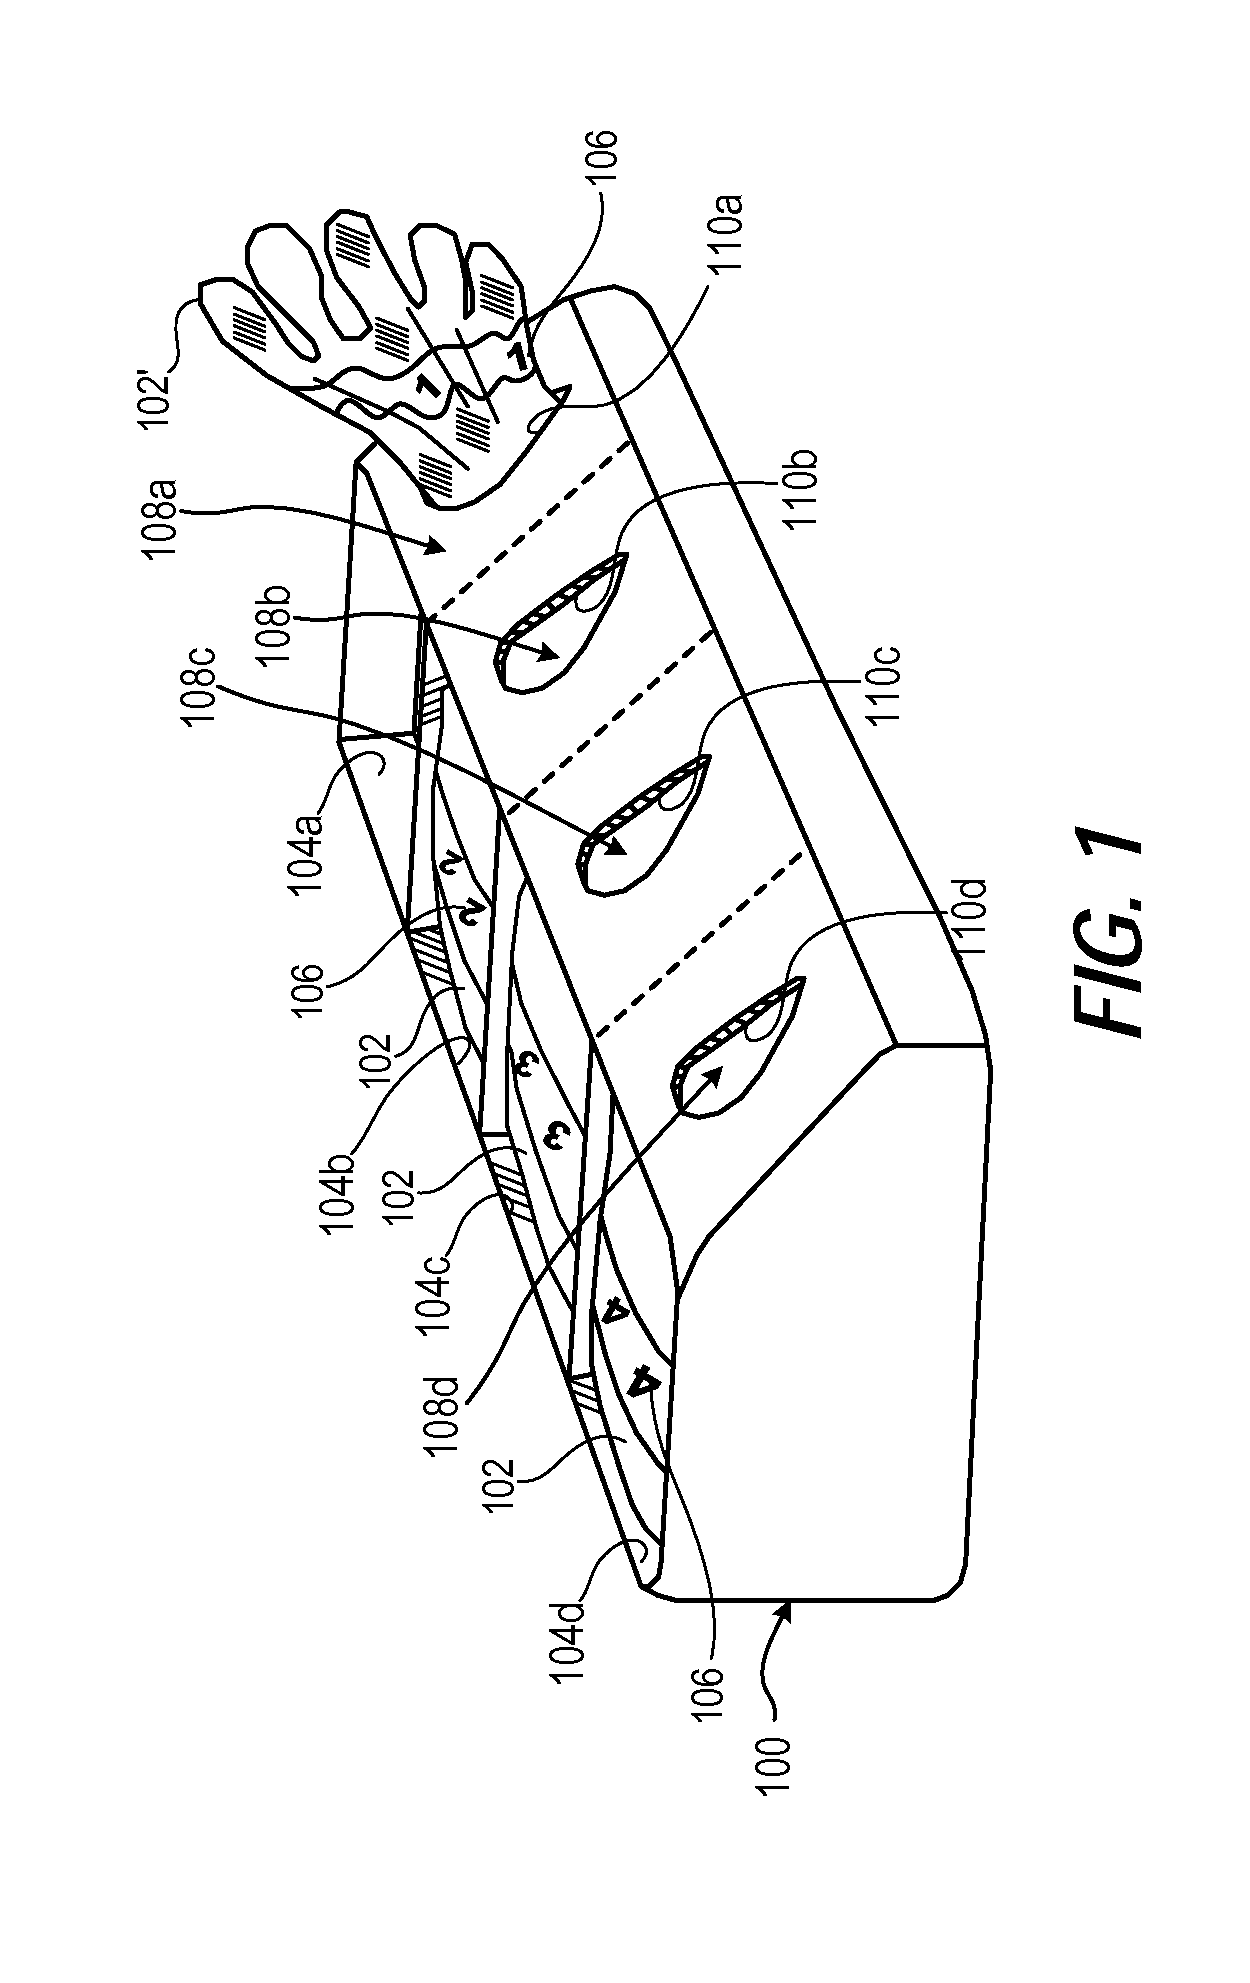 Container for surgical absorbent articles